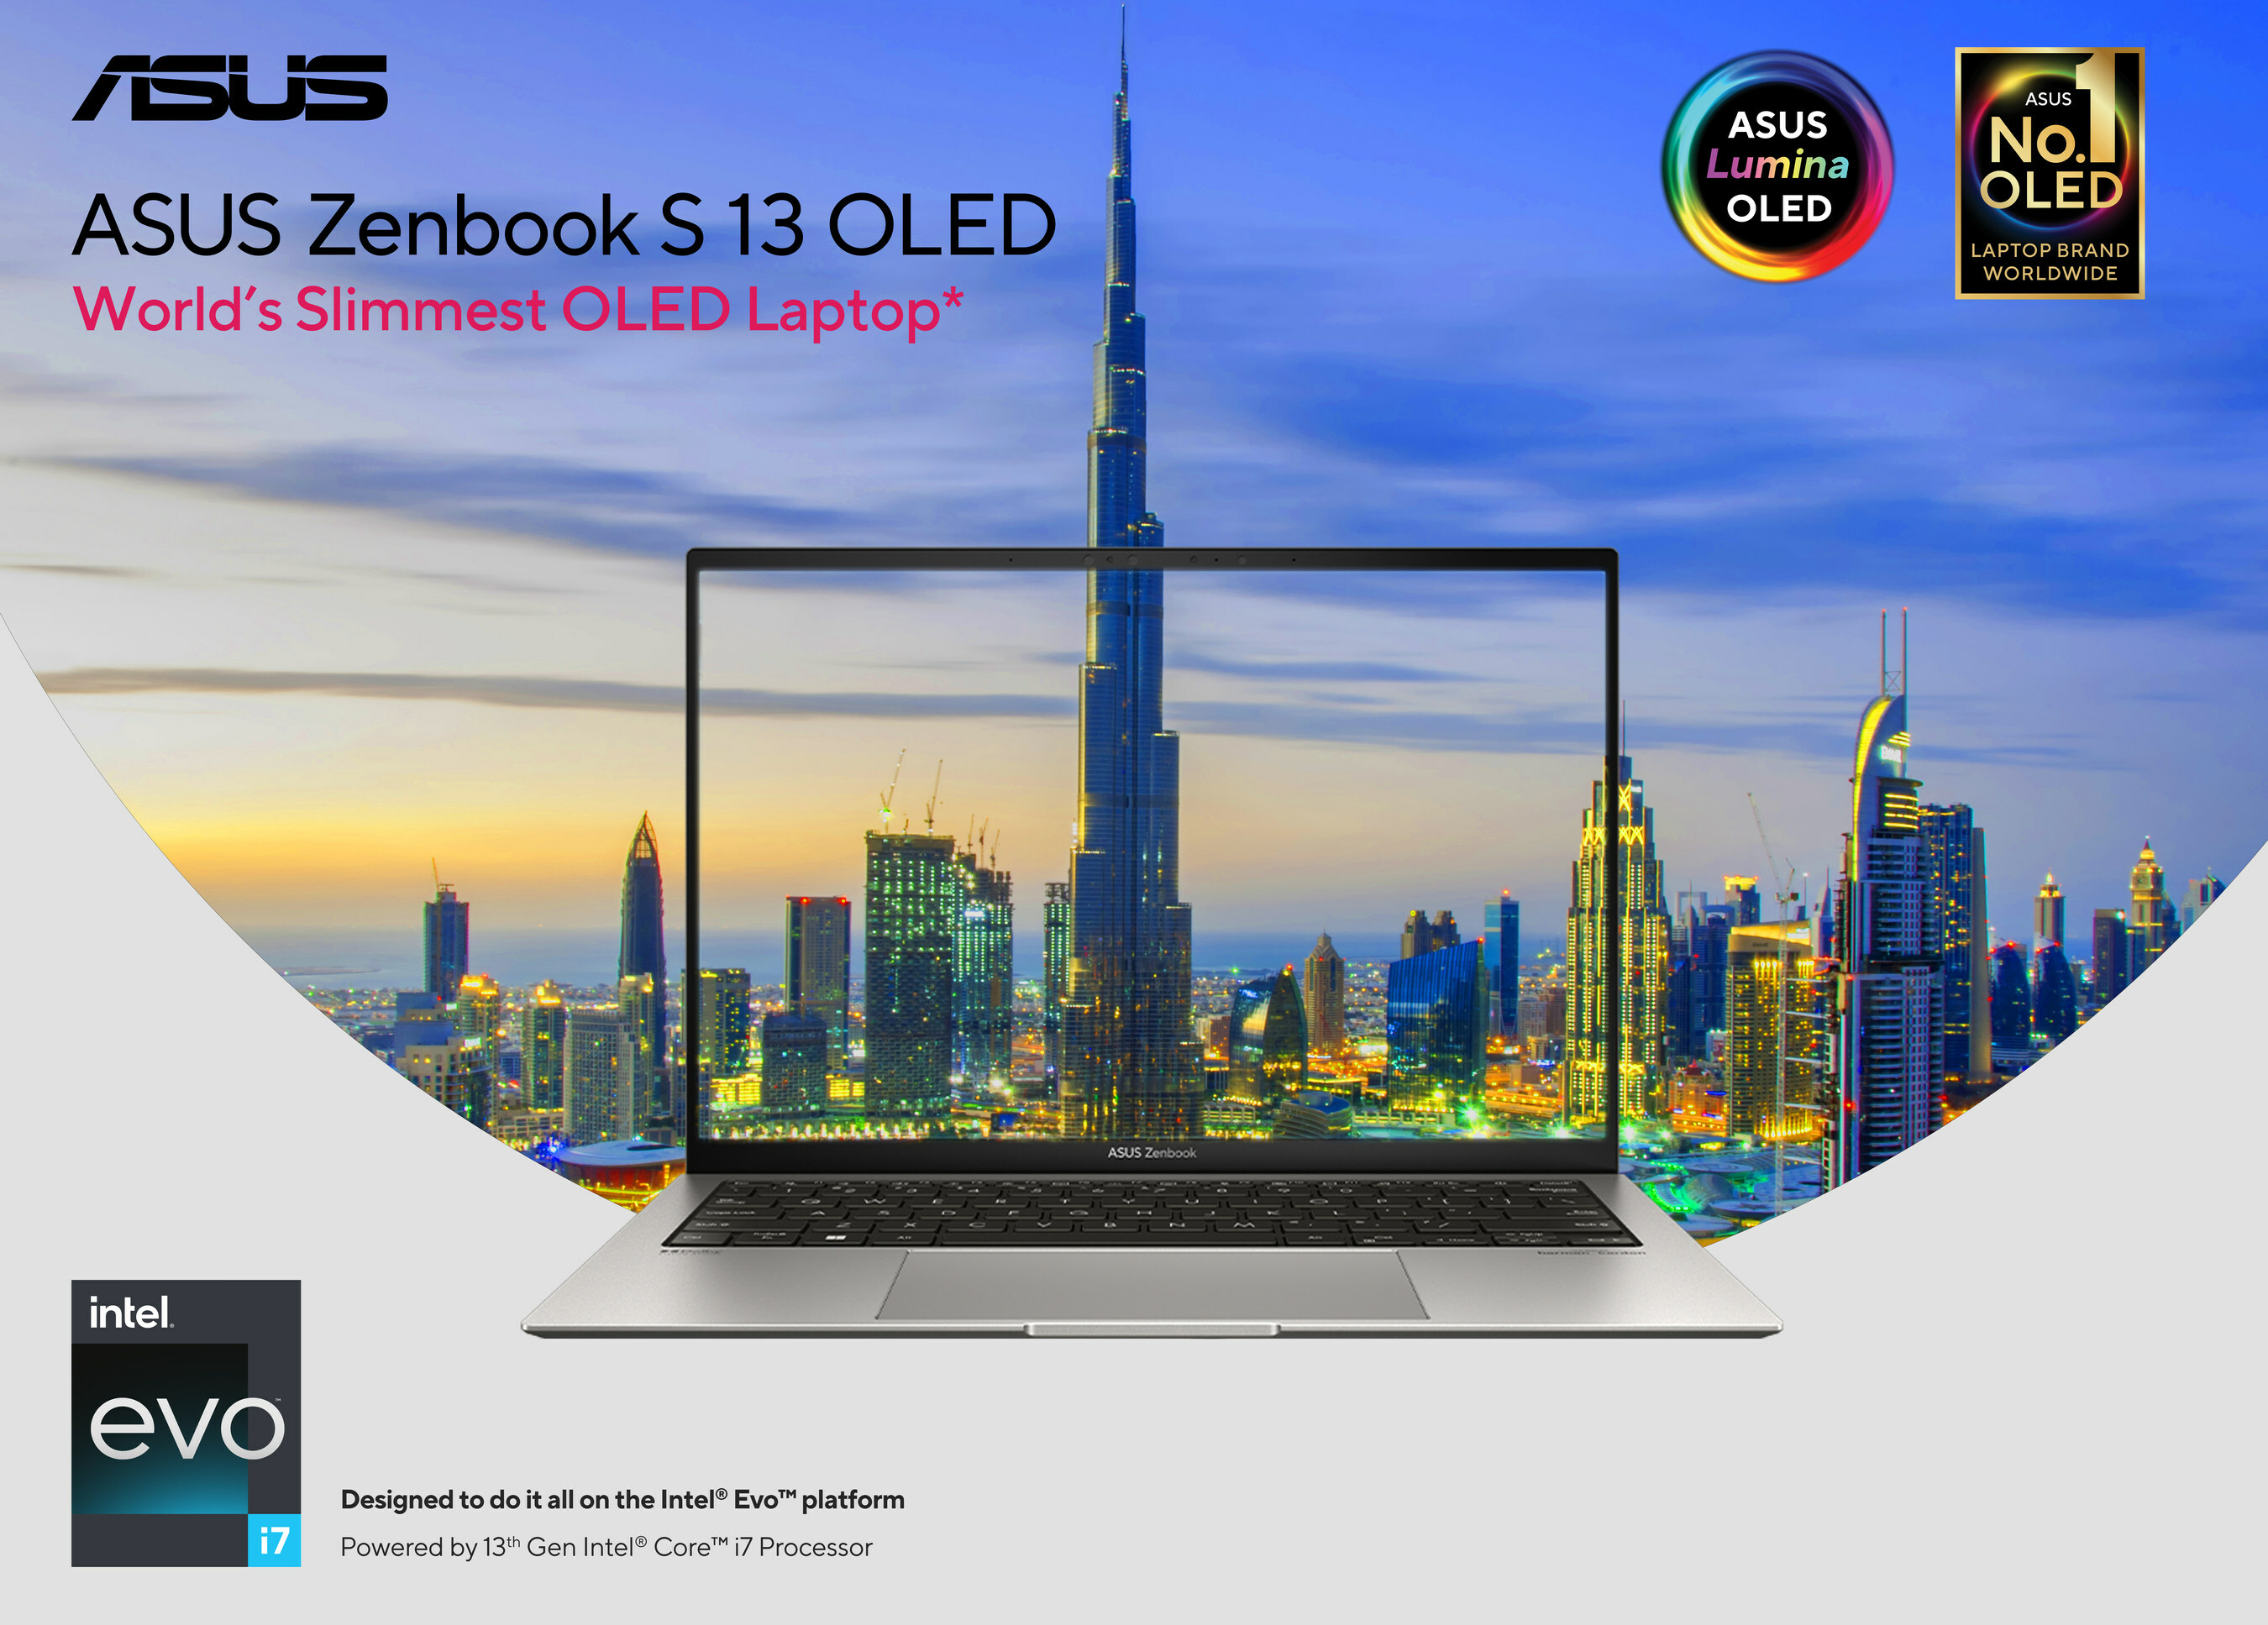 Image of ASUS Announces Zenbook S 13 OLED, the World's Slimmest 13.3" OLED Laptop